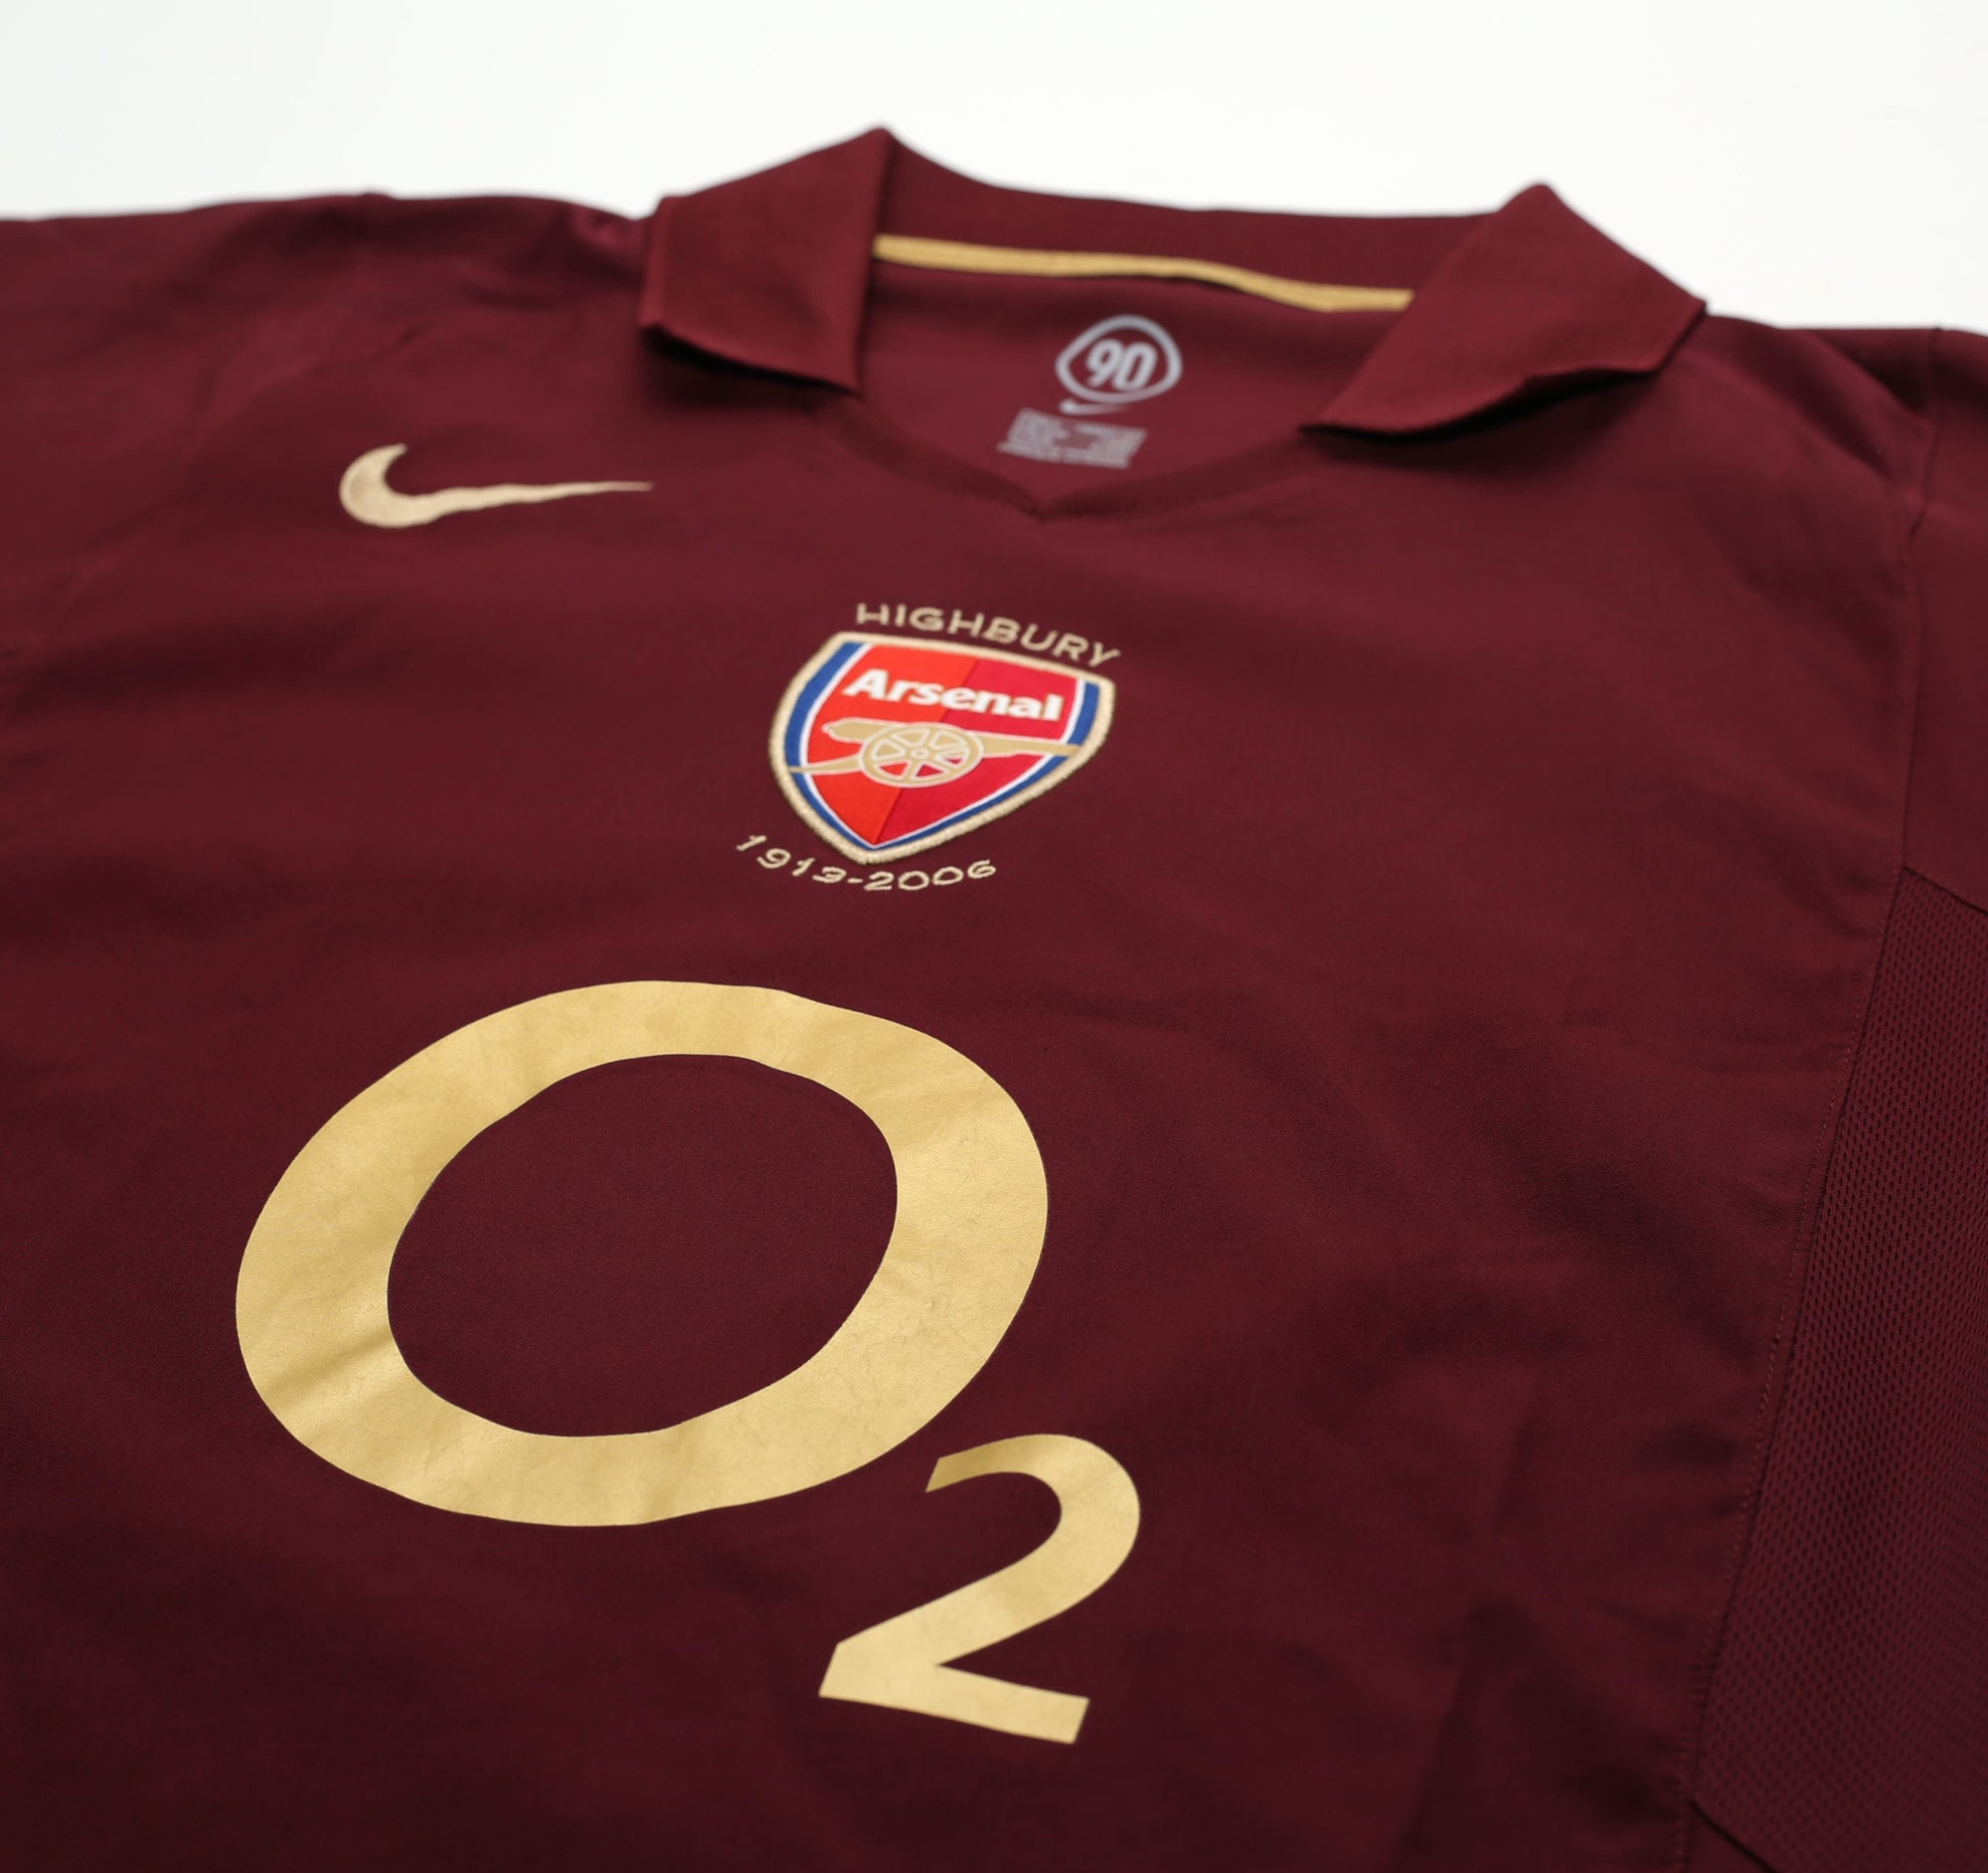 2005/06 PIRES #7 Arsenal Vintage Nike UCL Home Football Shirt Jersey (S)